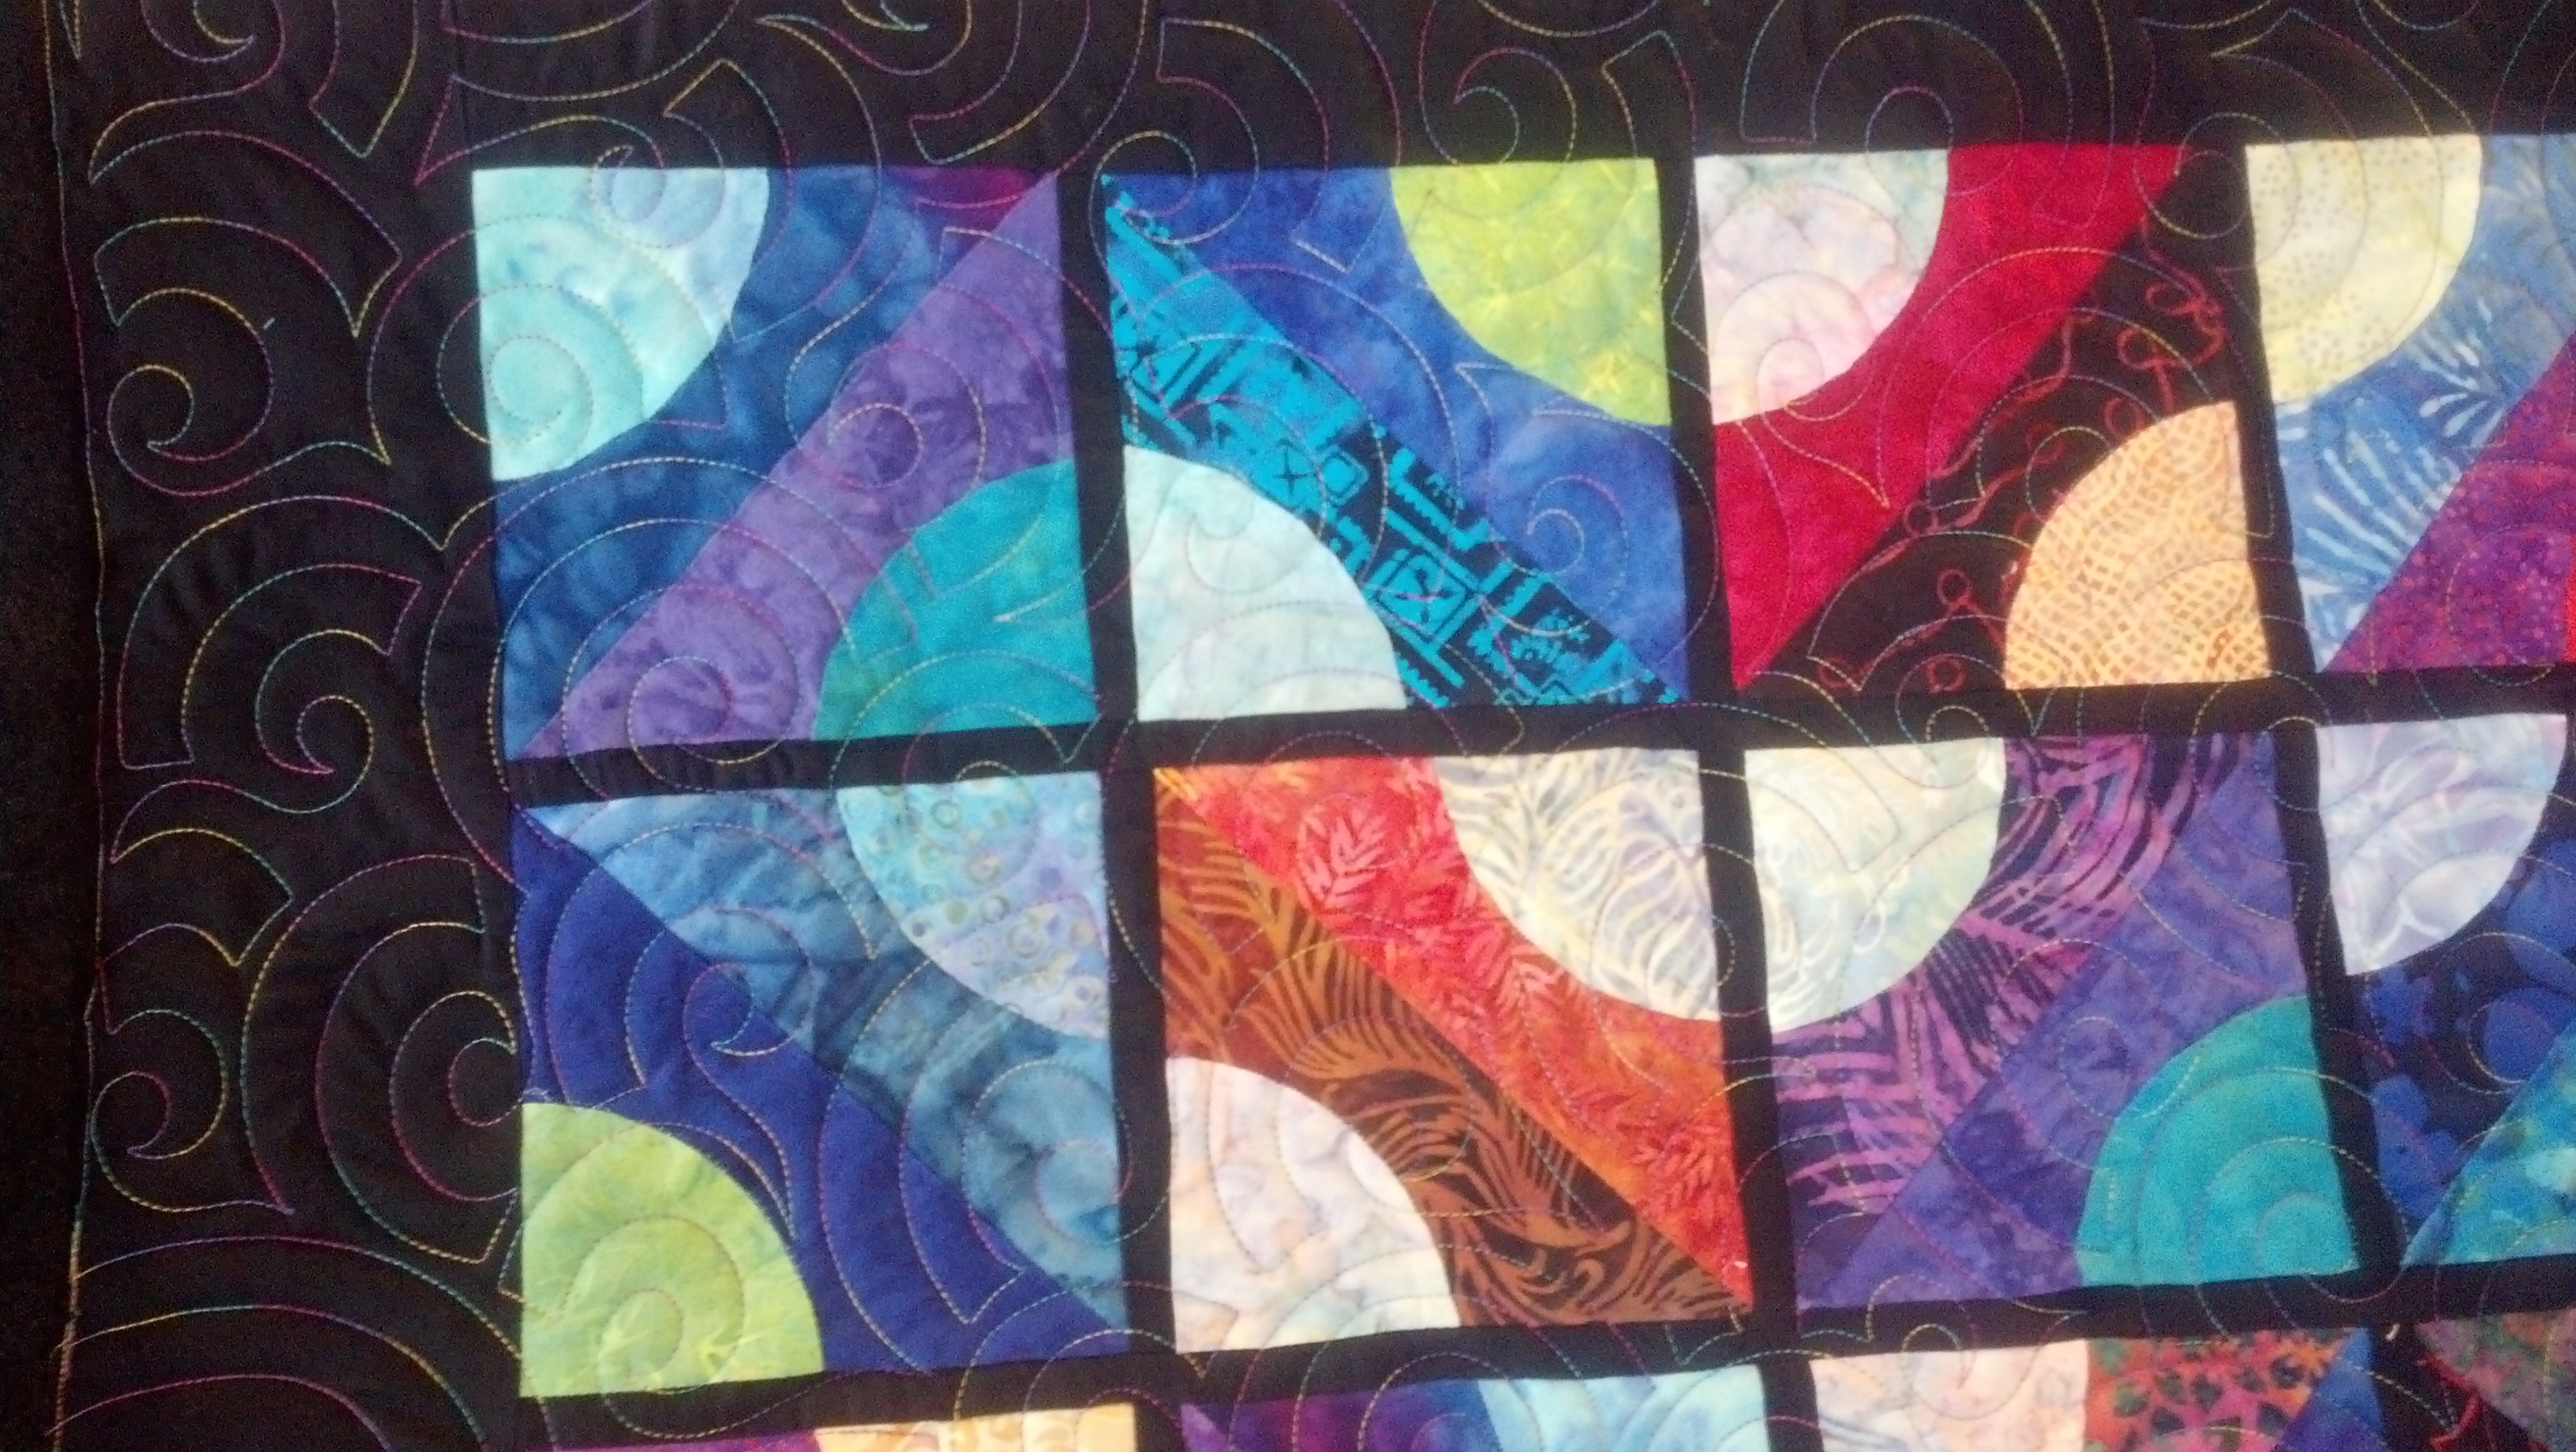 Freehand longarm quilting by Maria Denise Hall